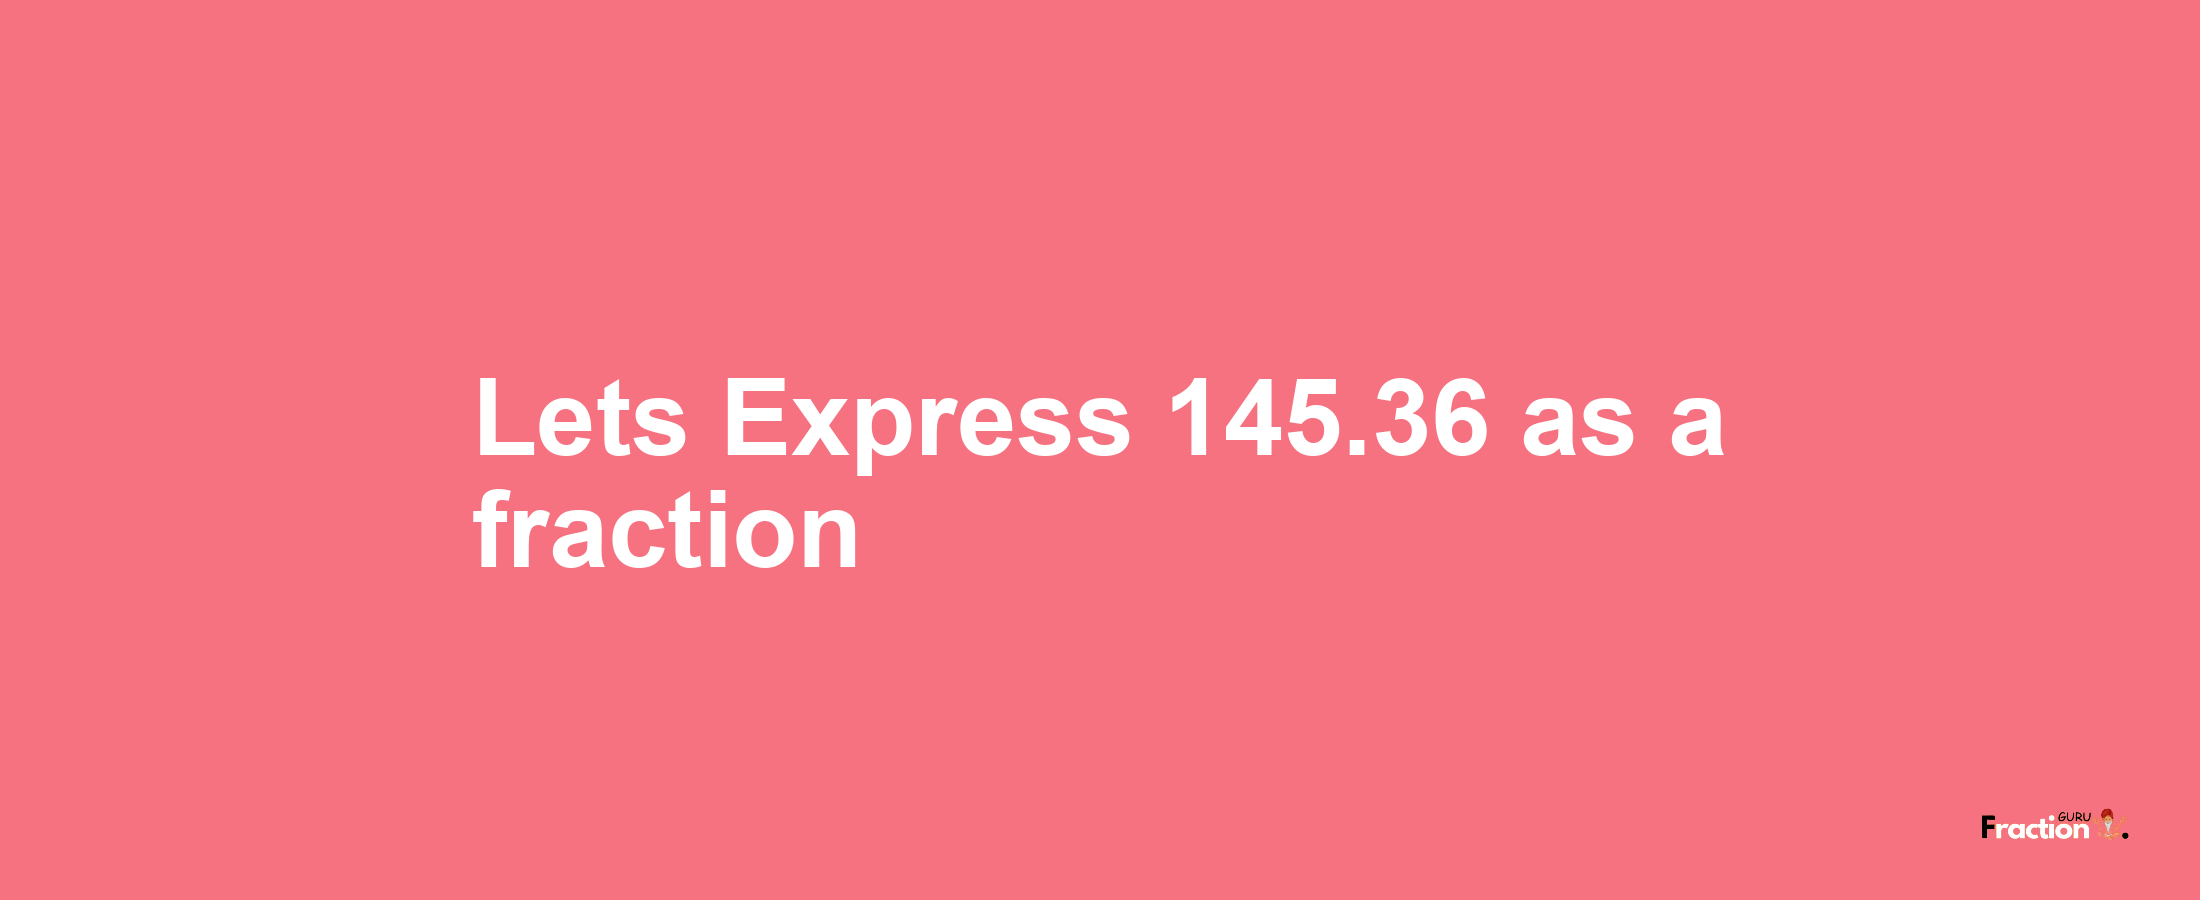 Lets Express 145.36 as afraction